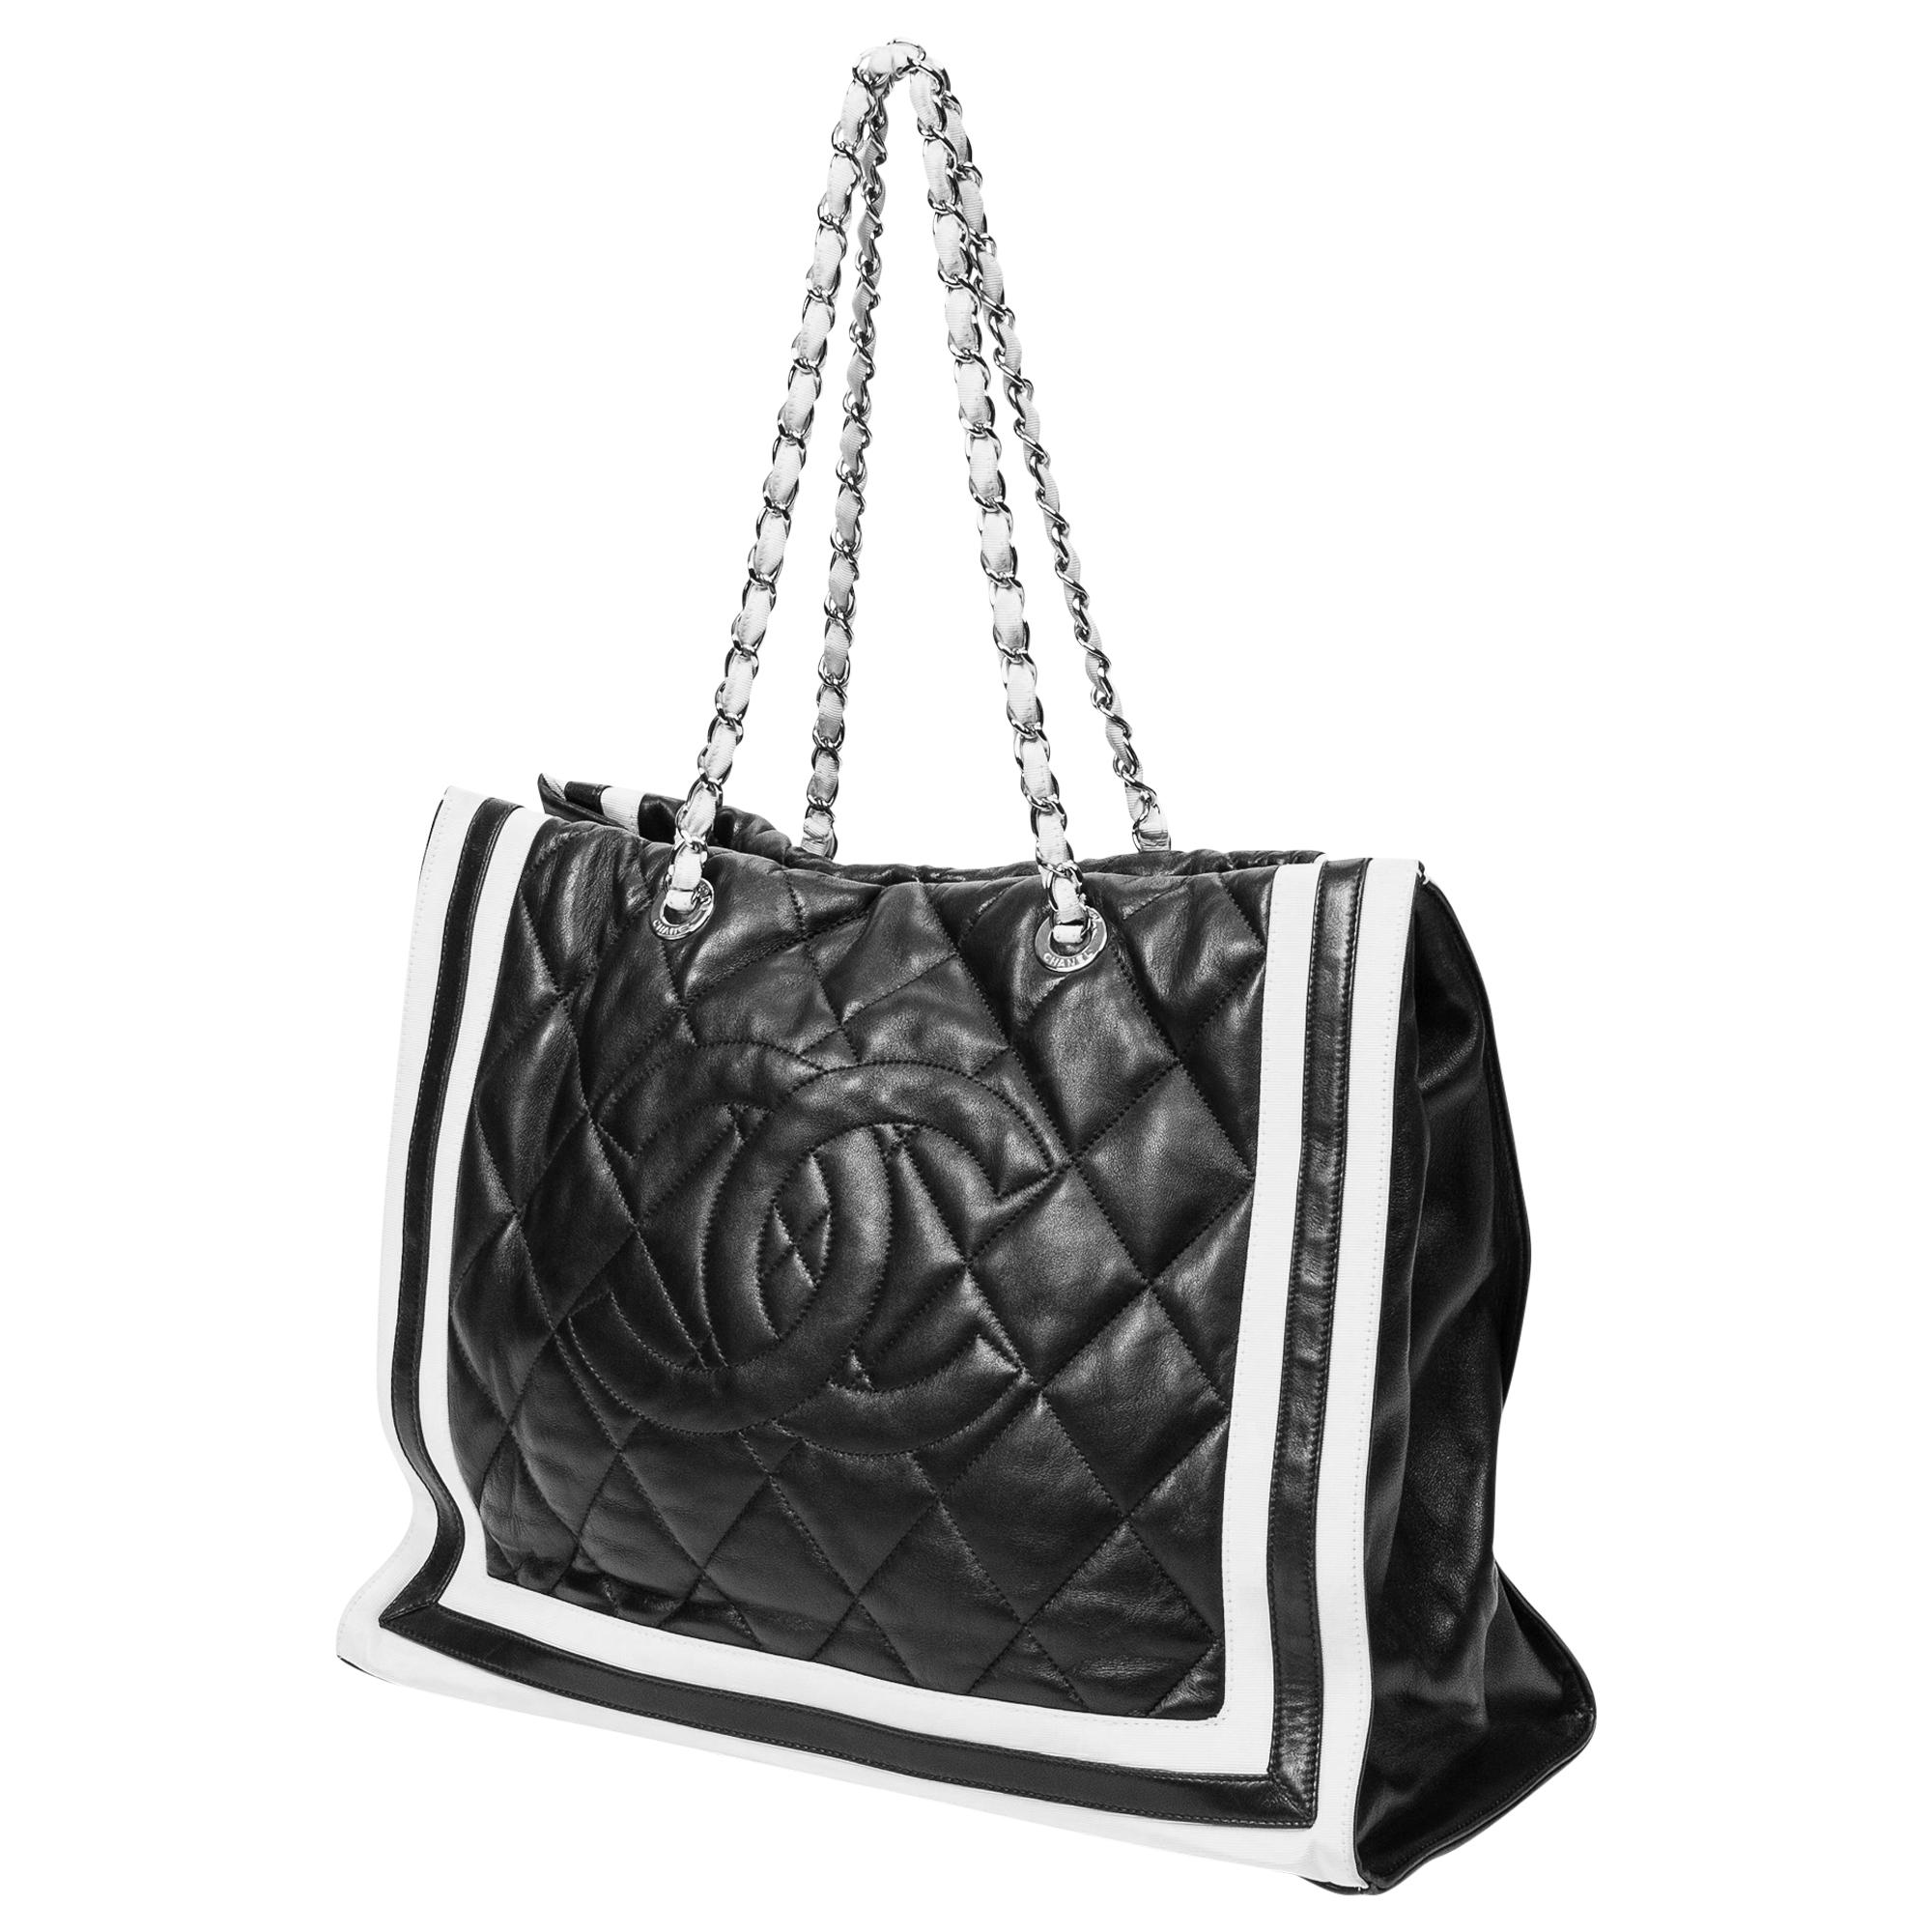 Introducing the Chanel 2009 Navy Large CC Chain Tote, a timeless classic for the sophisticated fashionista. Crafted from luxurious lambskin leather in a deep navy shade, it exudes elegance. Adorned with silver-tone hardware and featuring an open-top